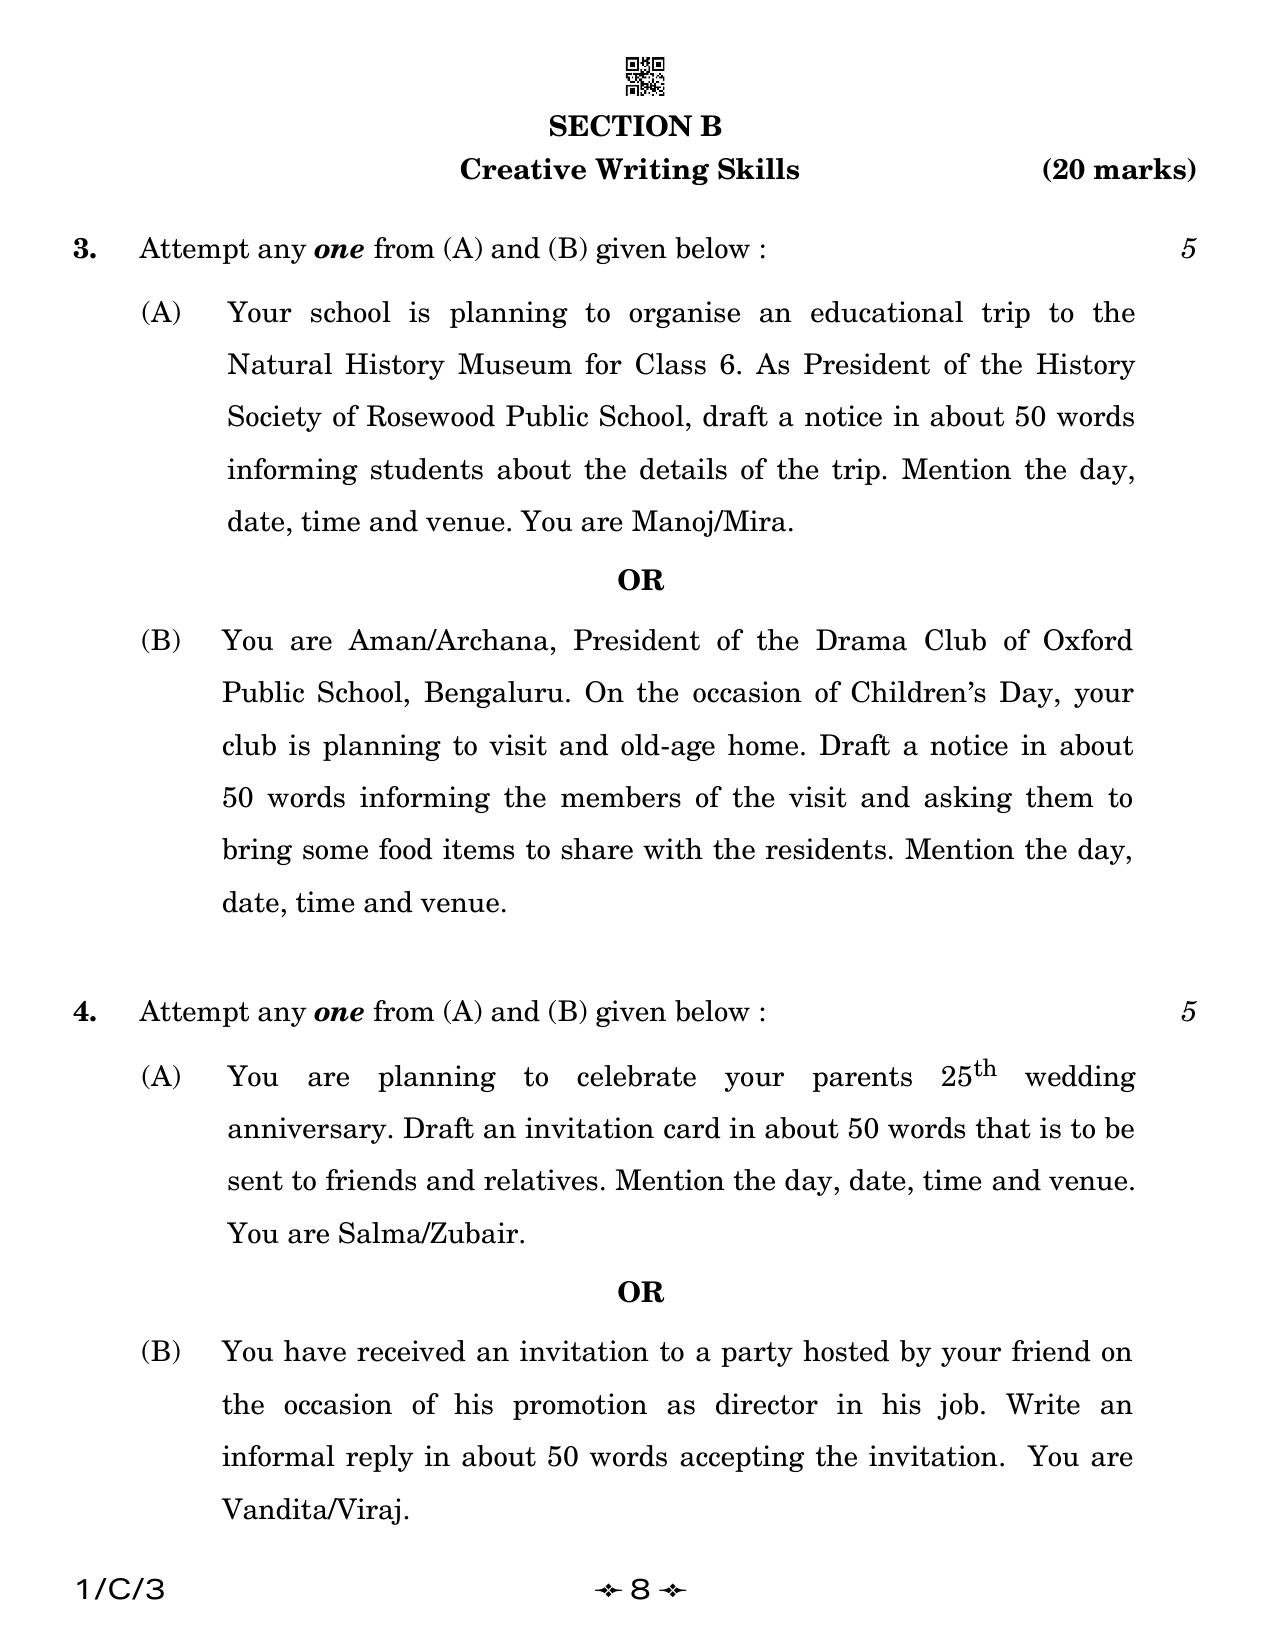 CBSE Class 12 1-3 English Core 2023 (Compartment) Question Paper - Page 8